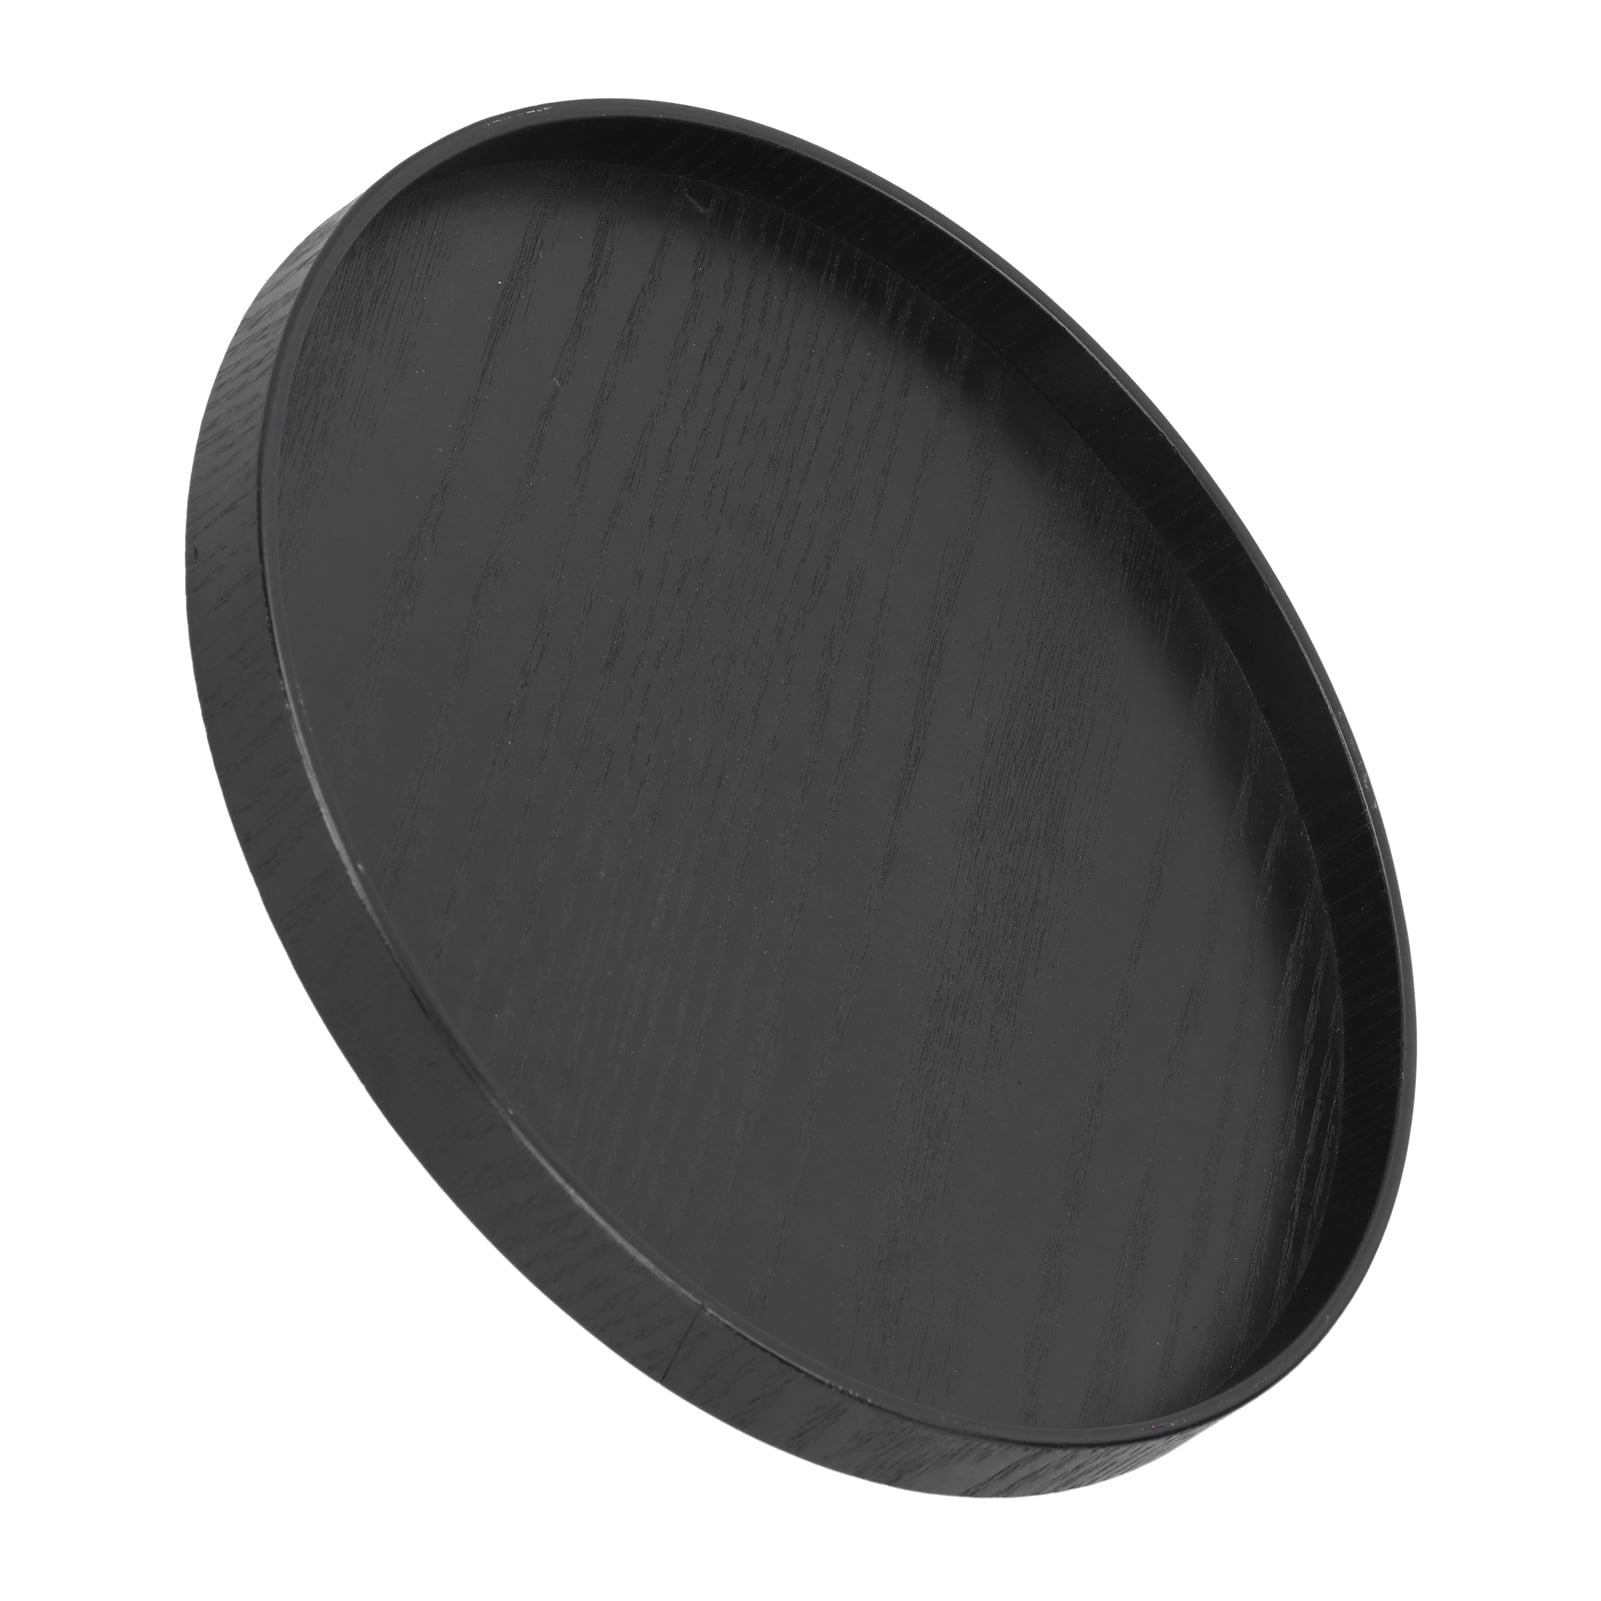 Black Round Wooden Food Fruit Serving Tray Service Plate For Home Kitchen Hotel 